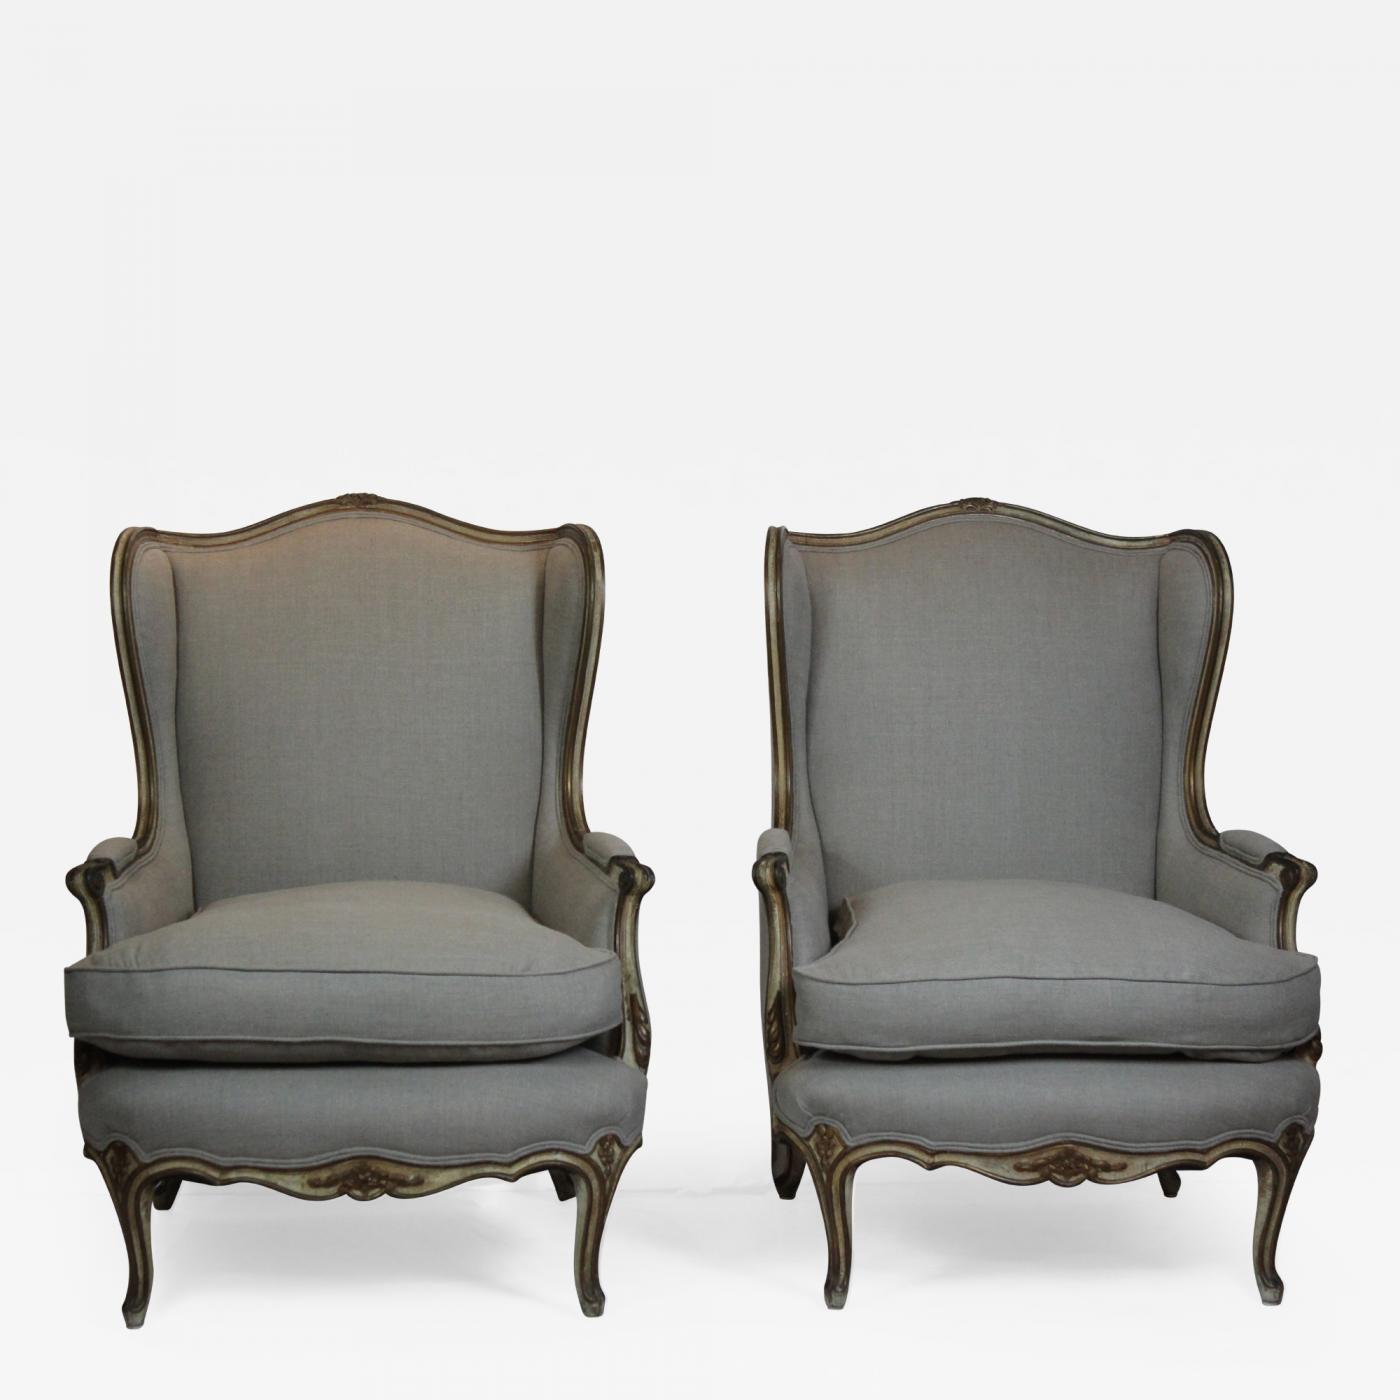 Pair Of Louis Xv Style Wingback Chairs